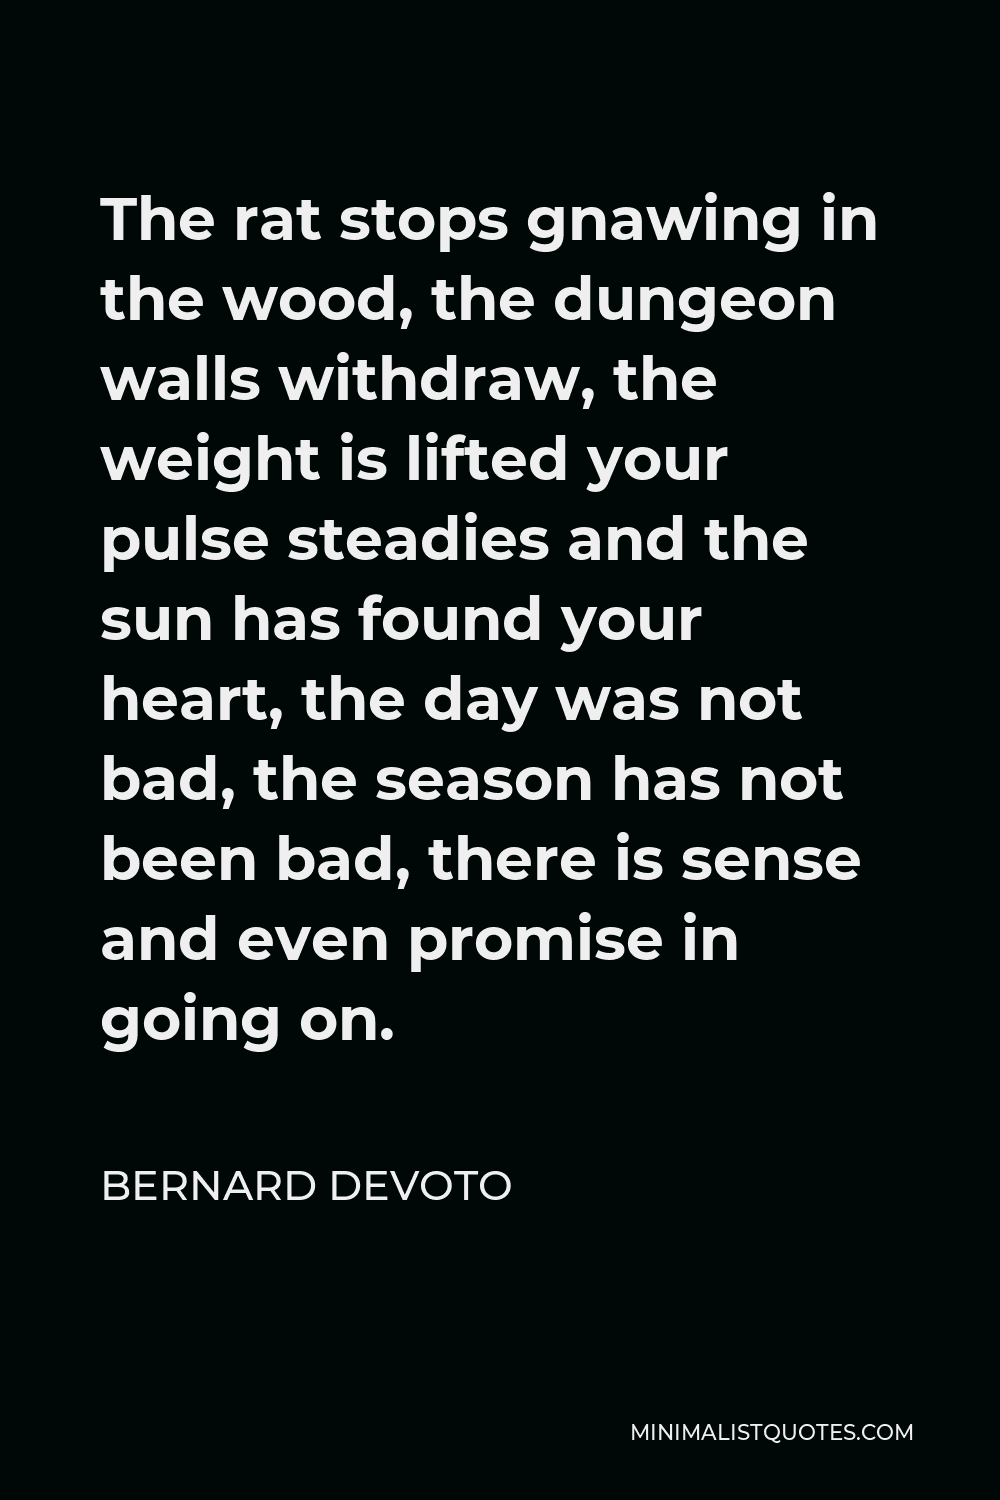 Bernard DeVoto Quote - The rat stops gnawing in the wood, the dungeon walls withdraw, the weight is lifted your pulse steadies and the sun has found your heart, the day was not bad, the season has not been bad, there is sense and even promise in going on.